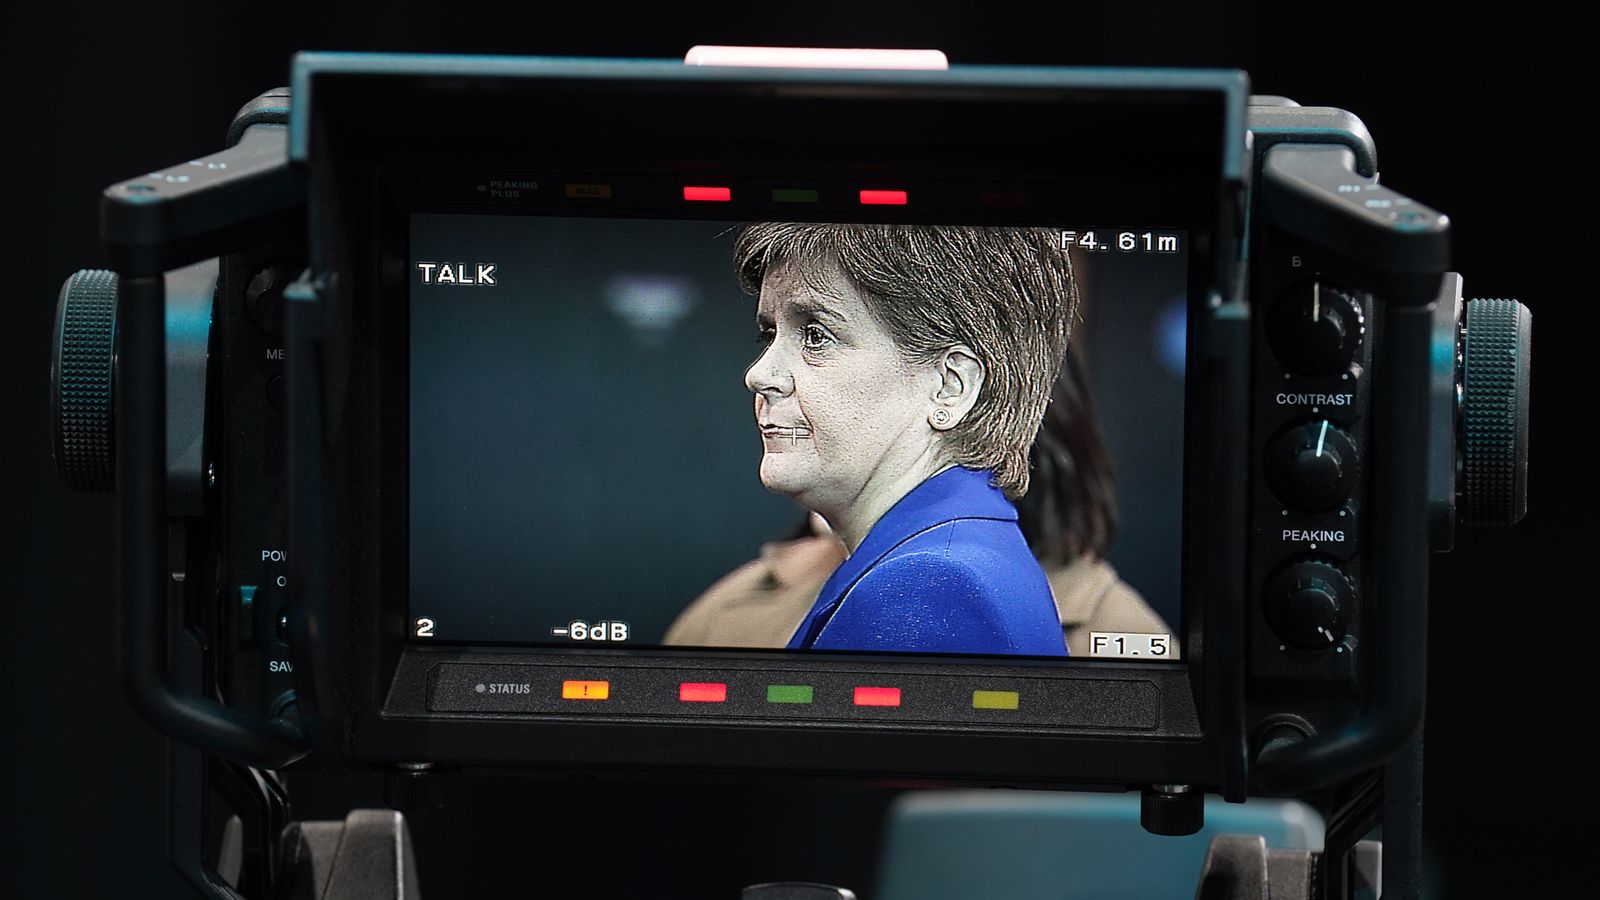 Nicola Sturgeon's exit is the end of an era - and it has big implications for Holyrood and Westminster